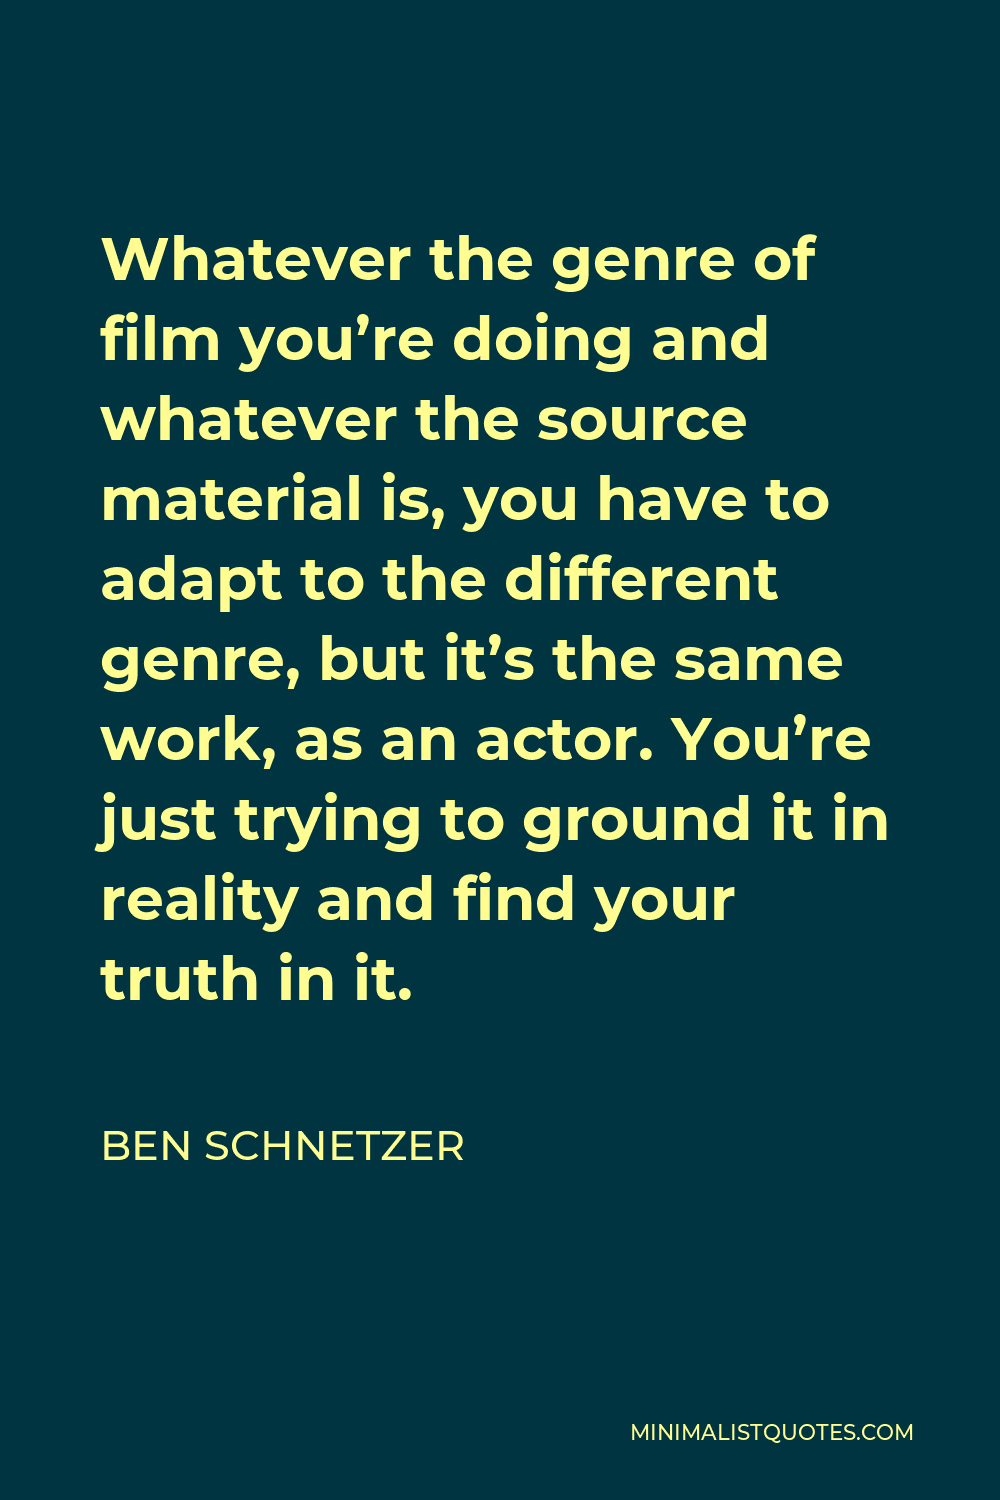 Ben Schnetzer Quote - Whatever the genre of film you’re doing and whatever the source material is, you have to adapt to the different genre, but it’s the same work, as an actor. You’re just trying to ground it in reality and find your truth in it.